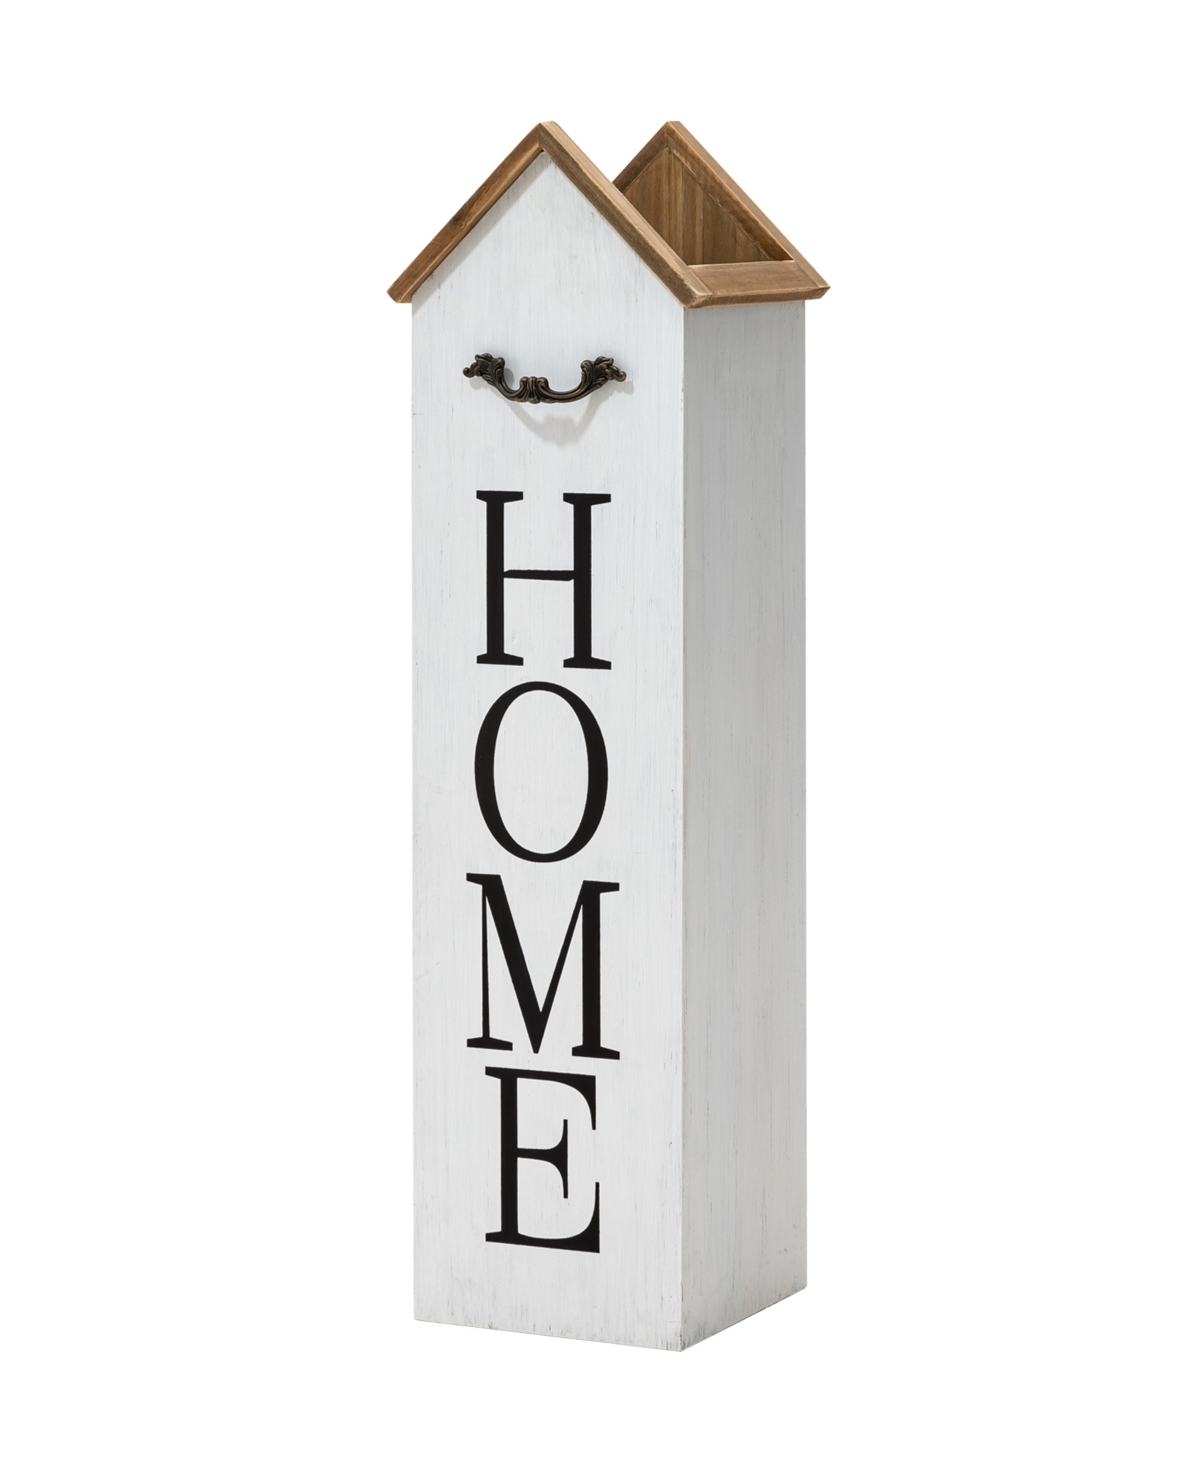 30" H Solid Wood White House with 3D Roof Boxed " Home" Porch Sign - Multi